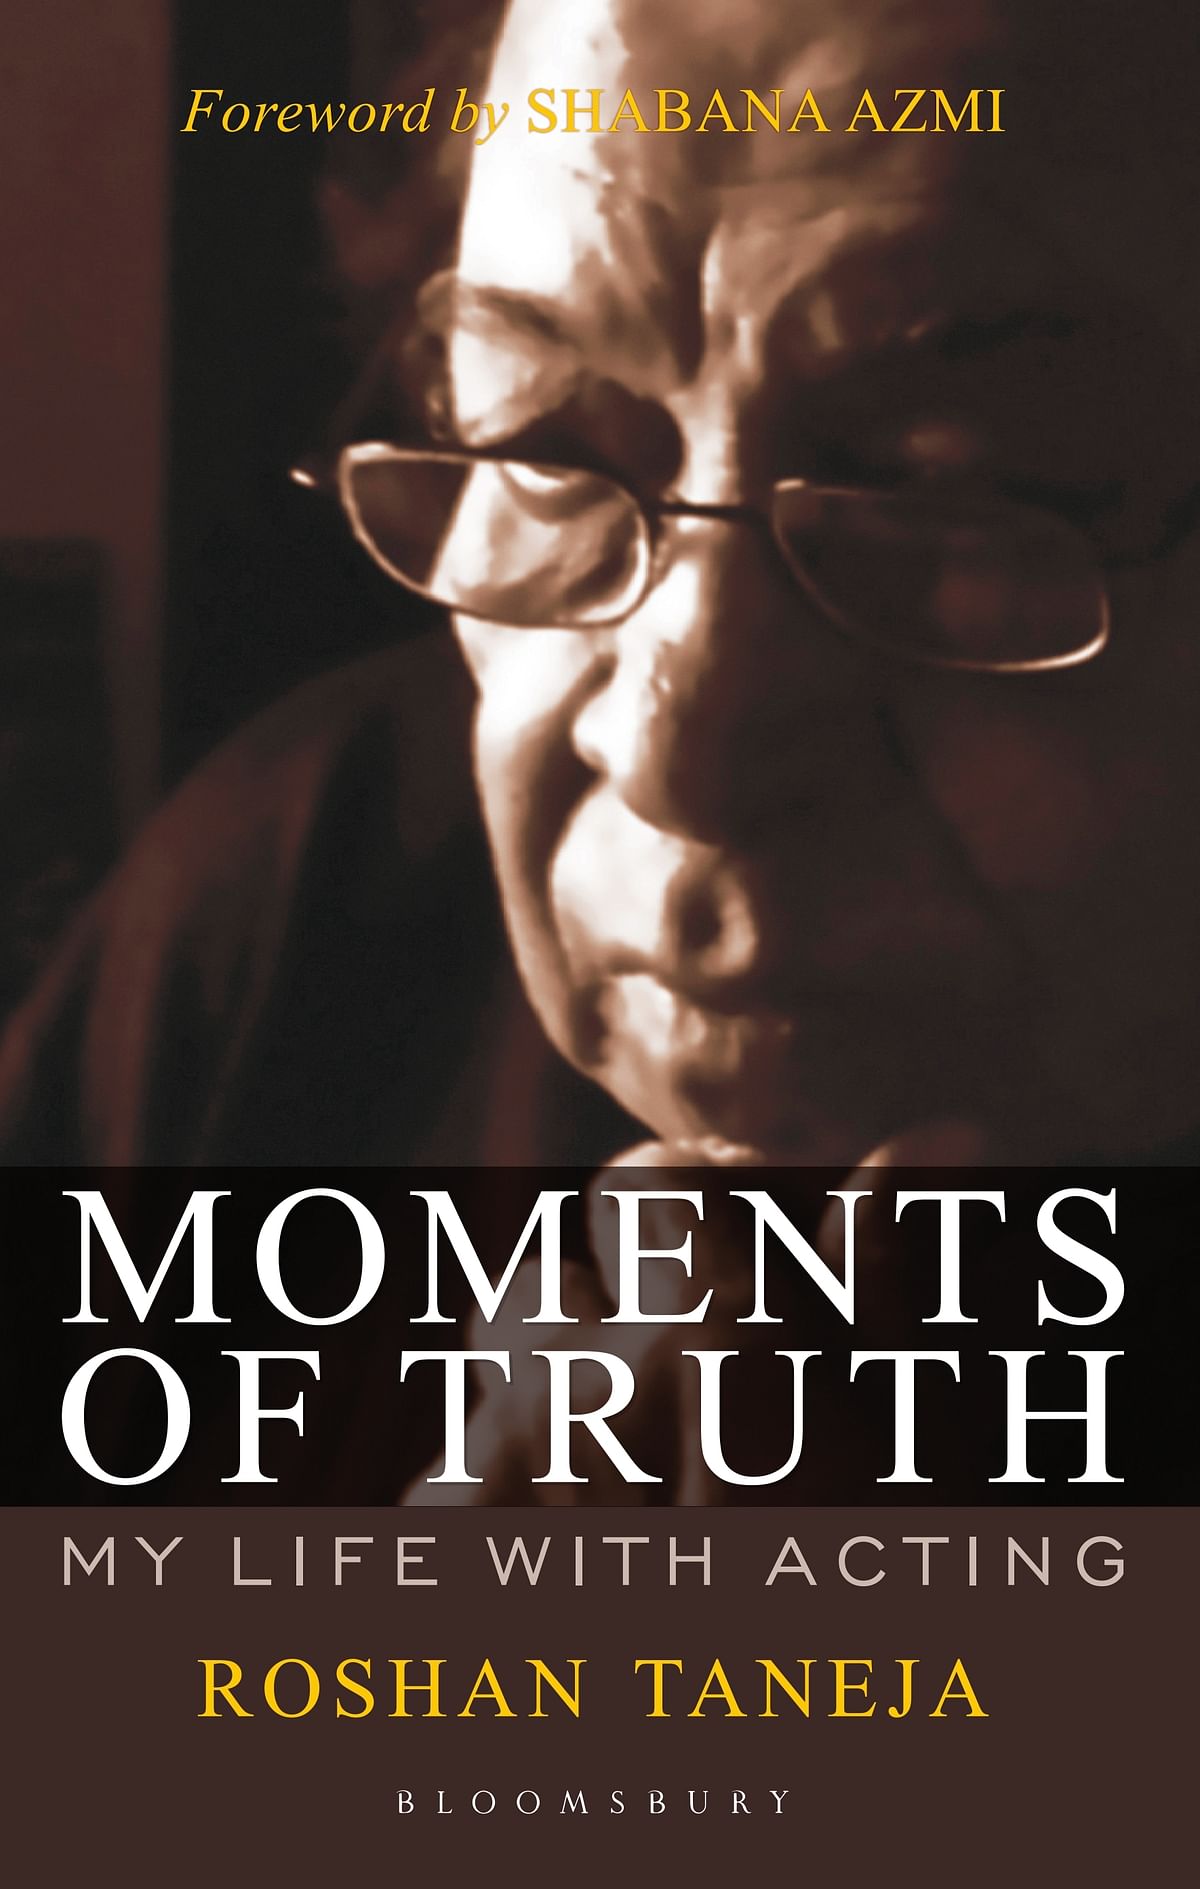 Roshan Taneja’s memoir ‘Moments of Truth: My Life With Acting’ is a treasure house for film enthusiasts. 